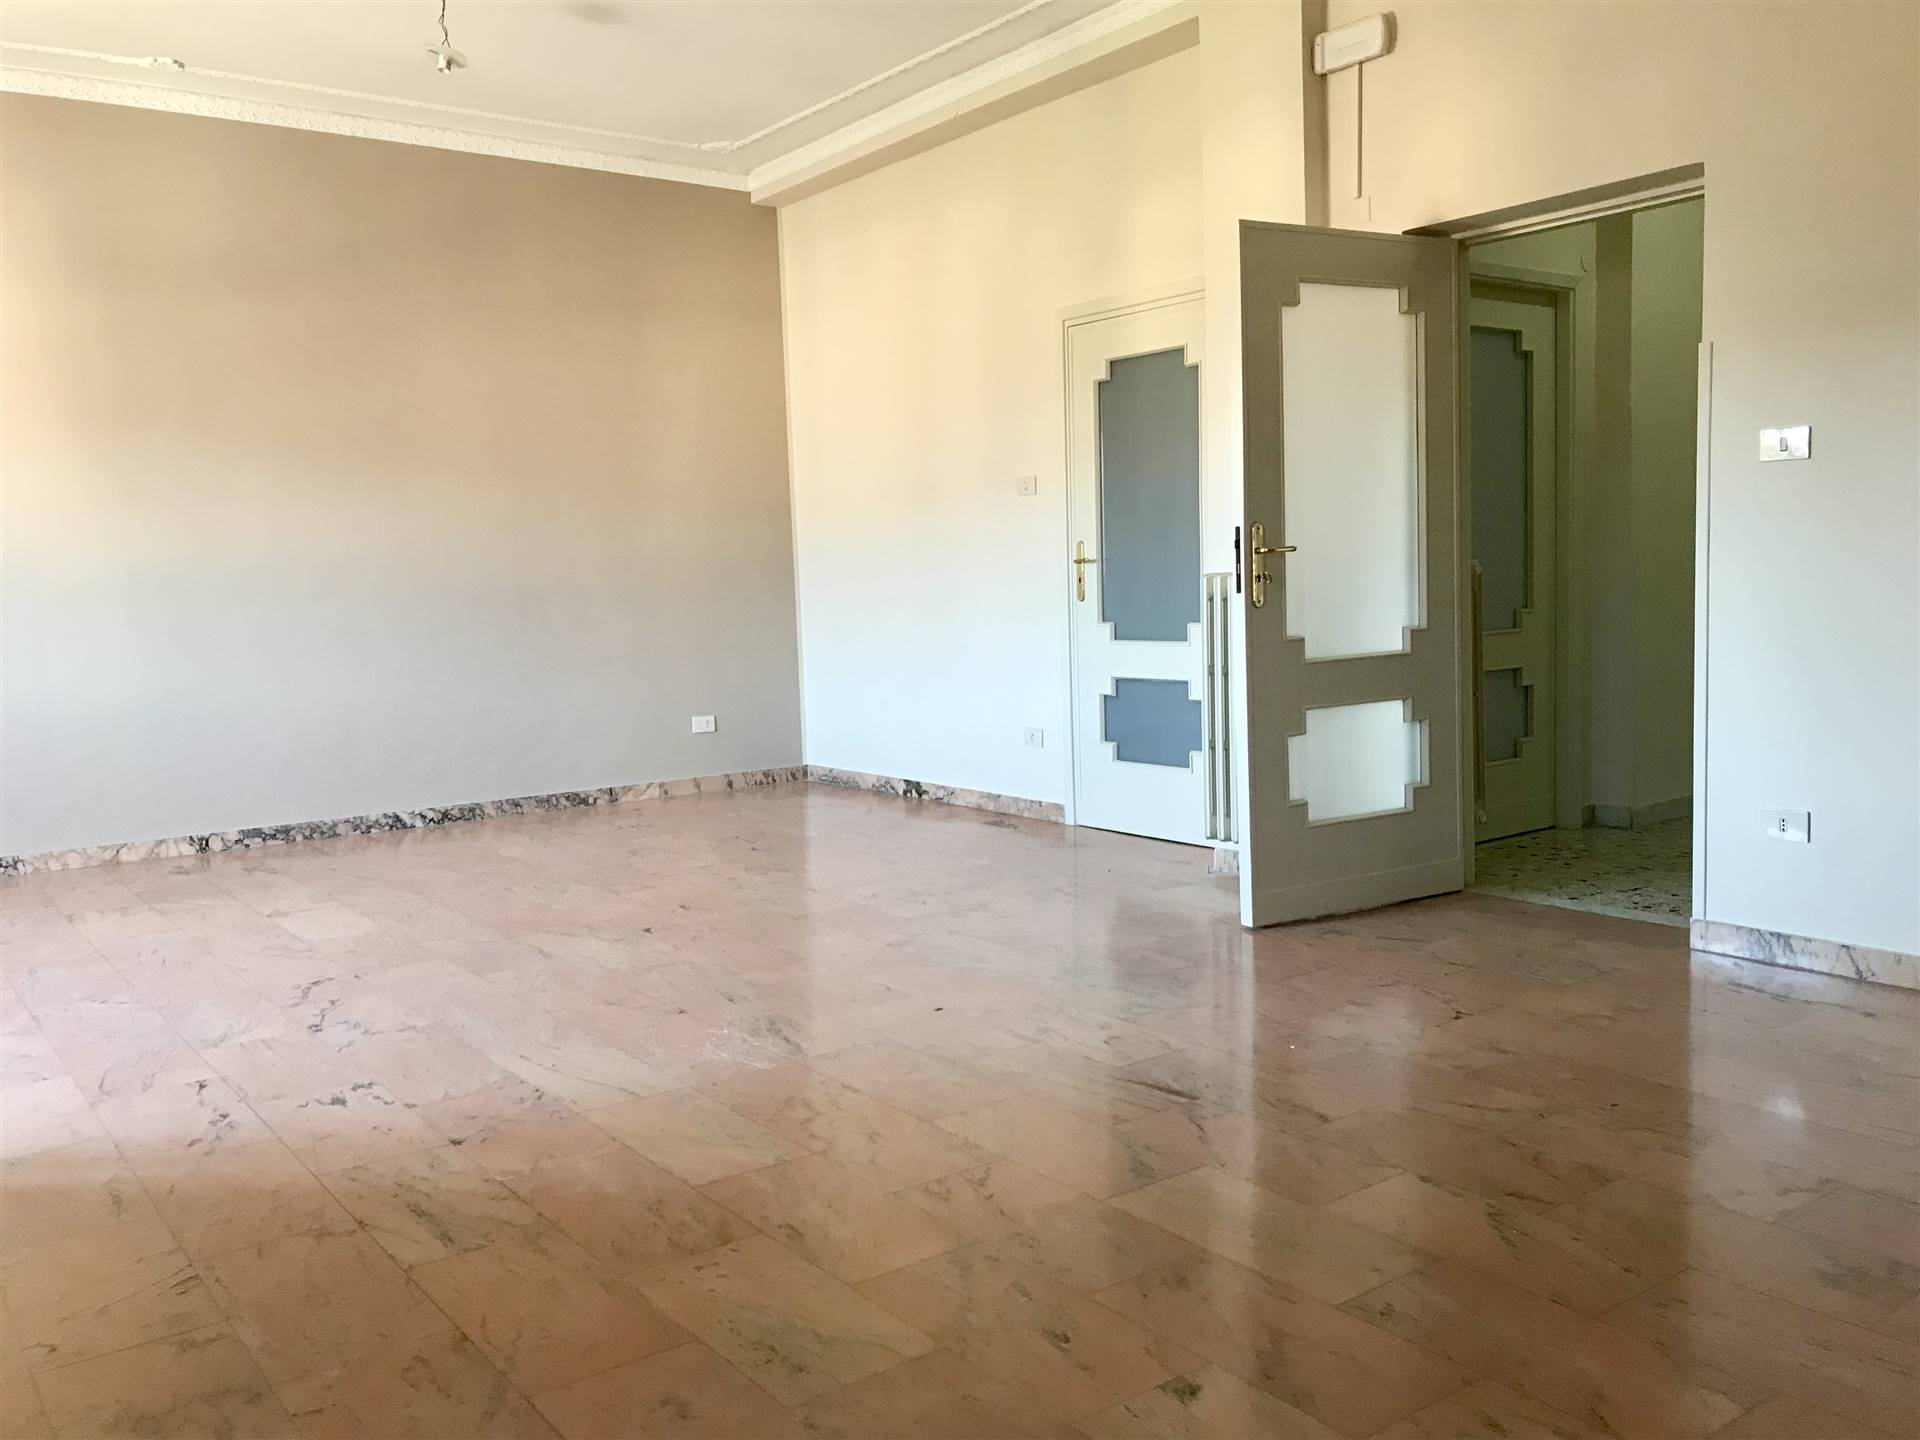 CITTÀ 2000, COSENZA, Apartment for rent, Good condition, Heating Individual heating system, Energetic class: F, placed at Raised on 4, composed by: 4 